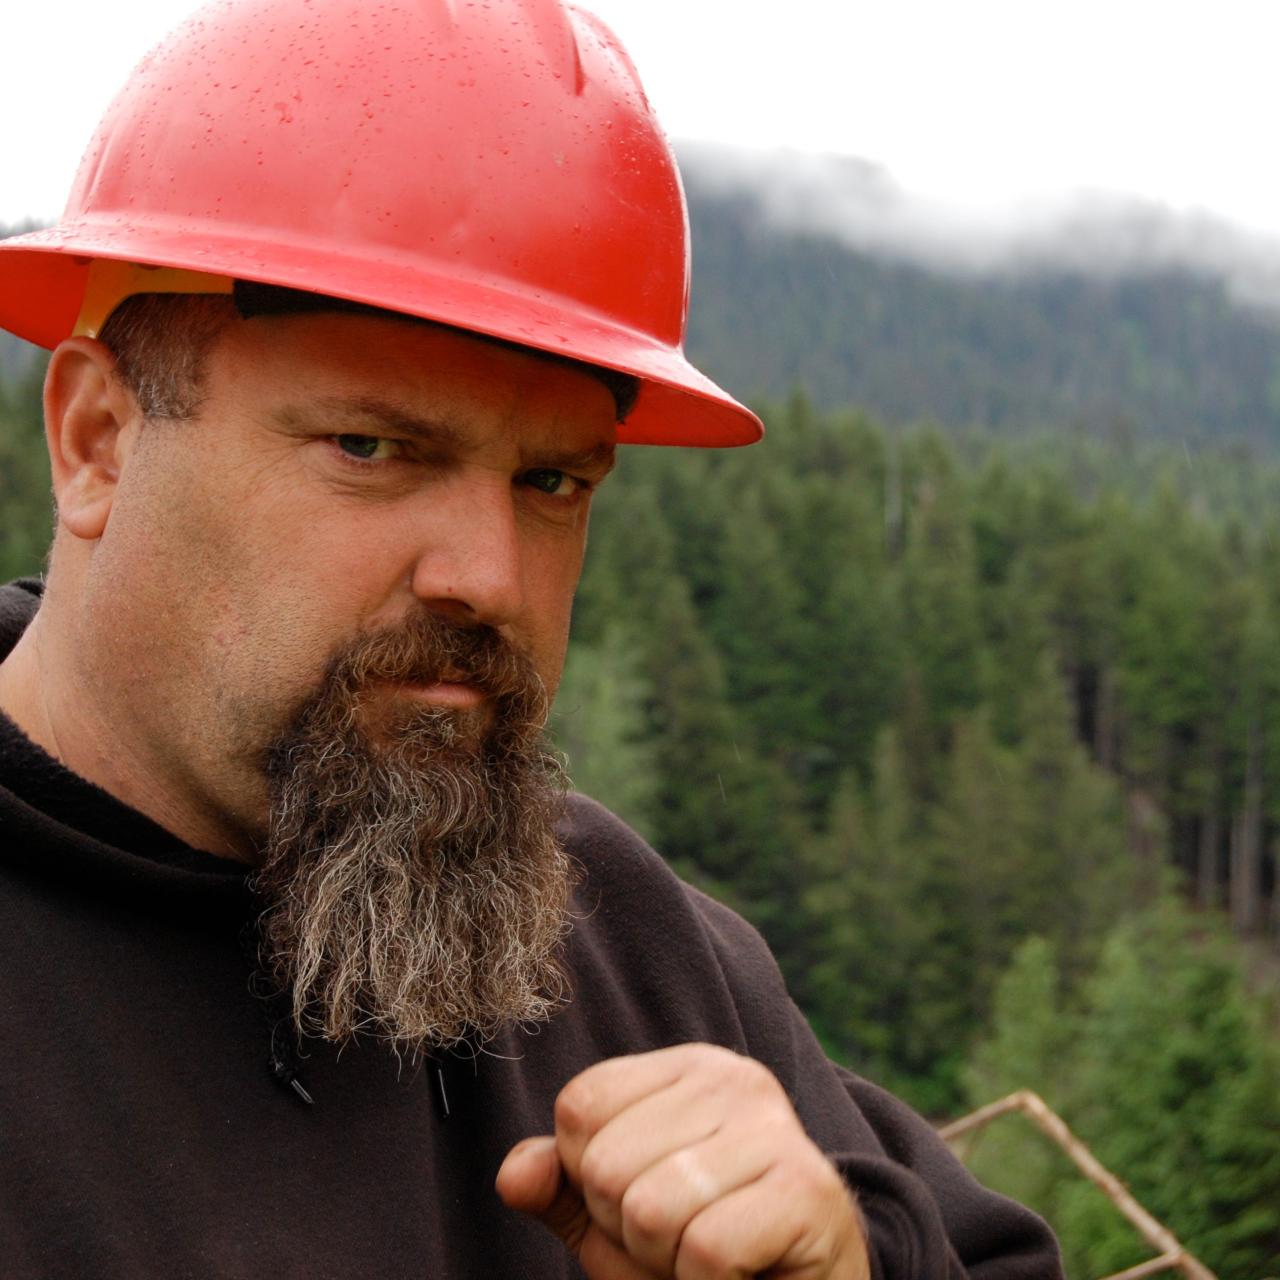 The 7 Best Reality Mining TV Shows